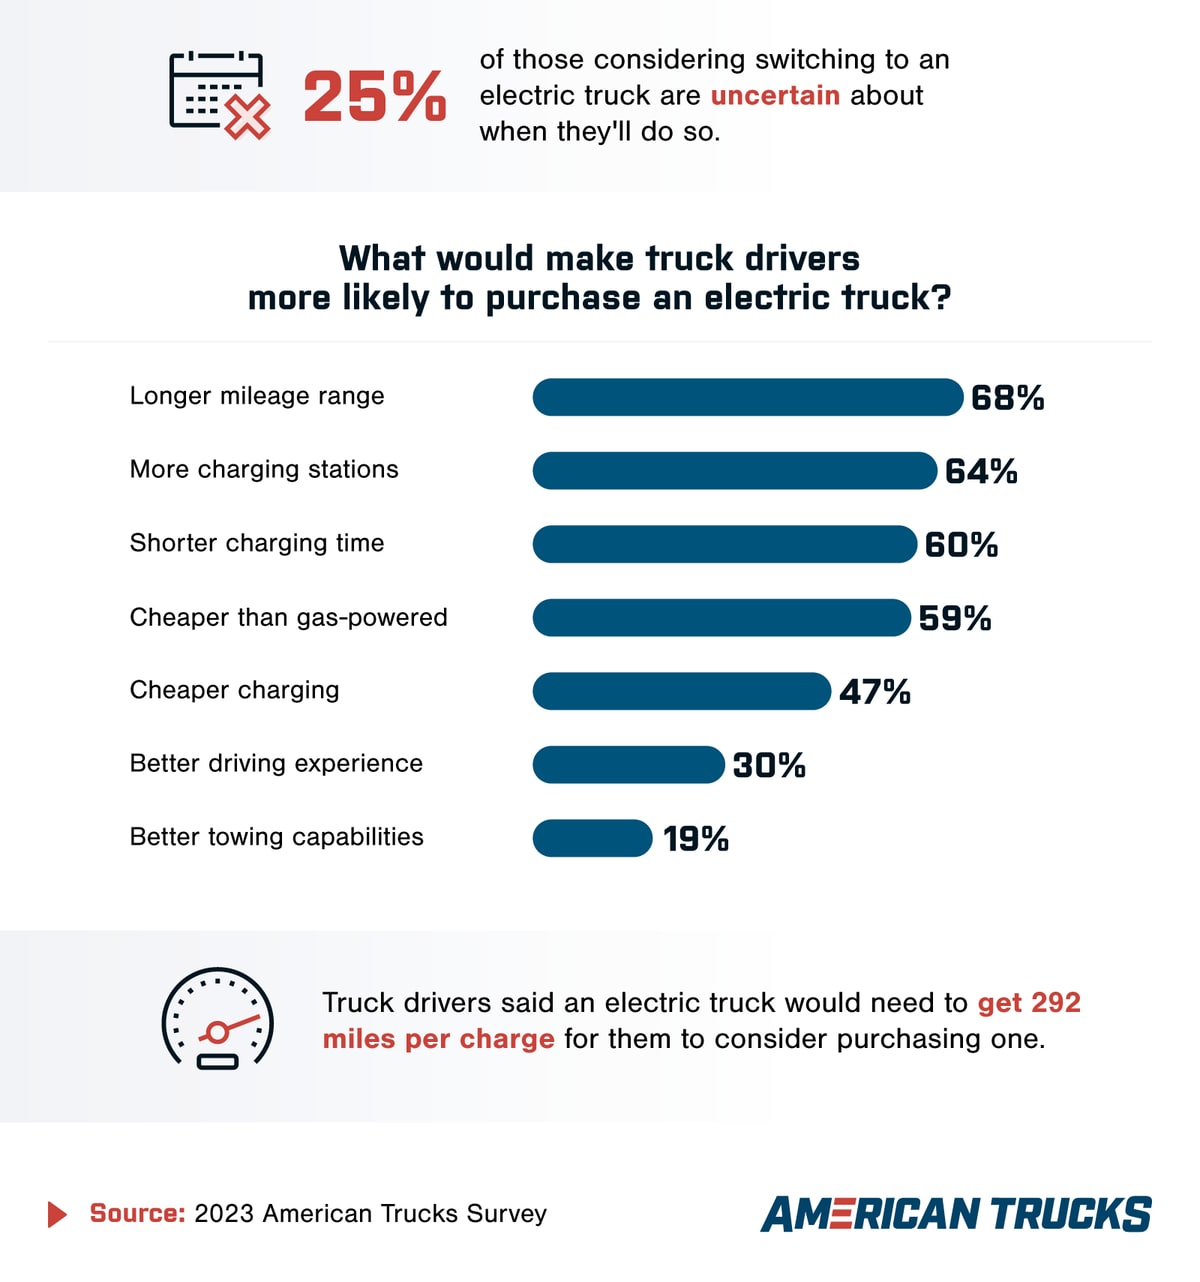 Electric truck survey was completed by AmericanTrucks.com